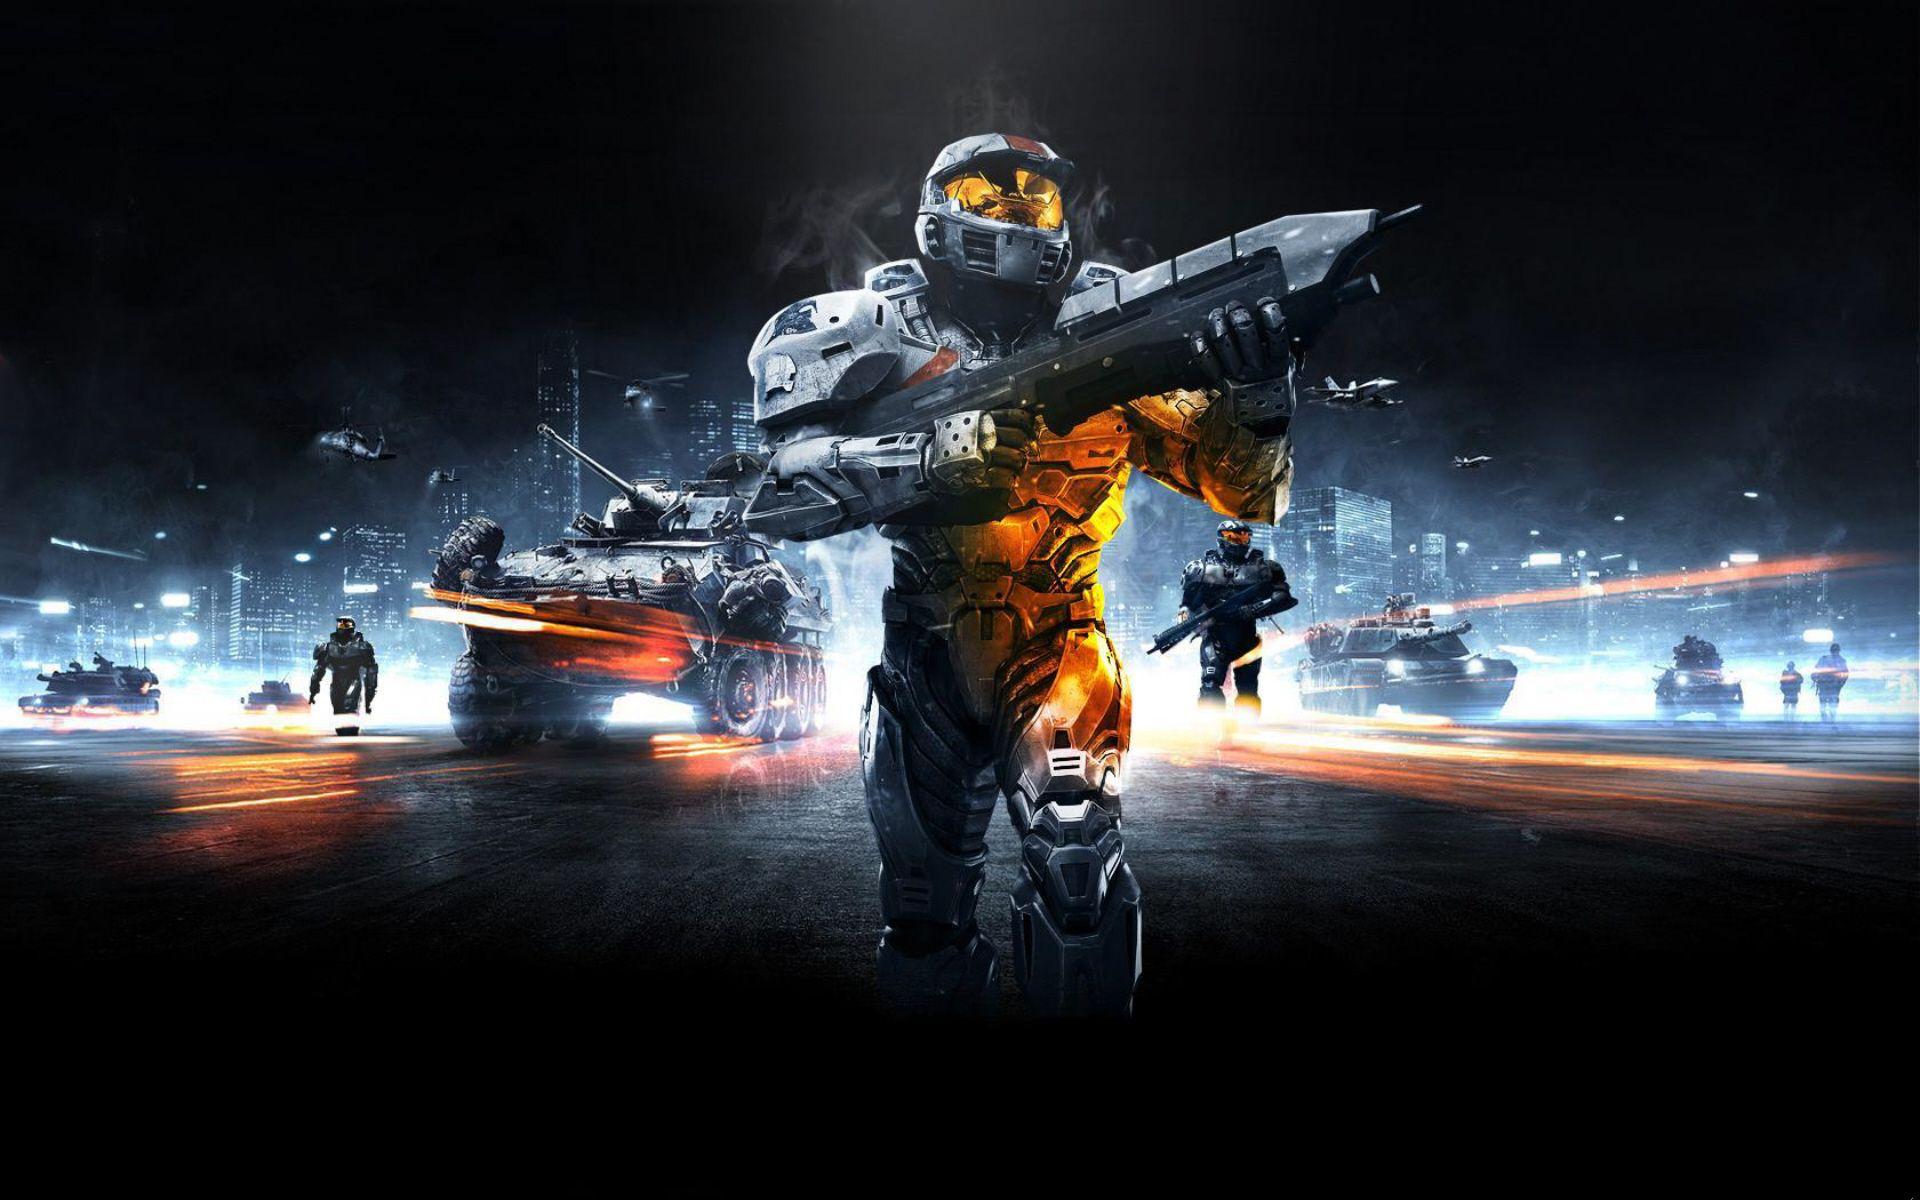 1080x1920 Battlefield 3 Wallpapers for Android Mobile Smartphone [Full HD]